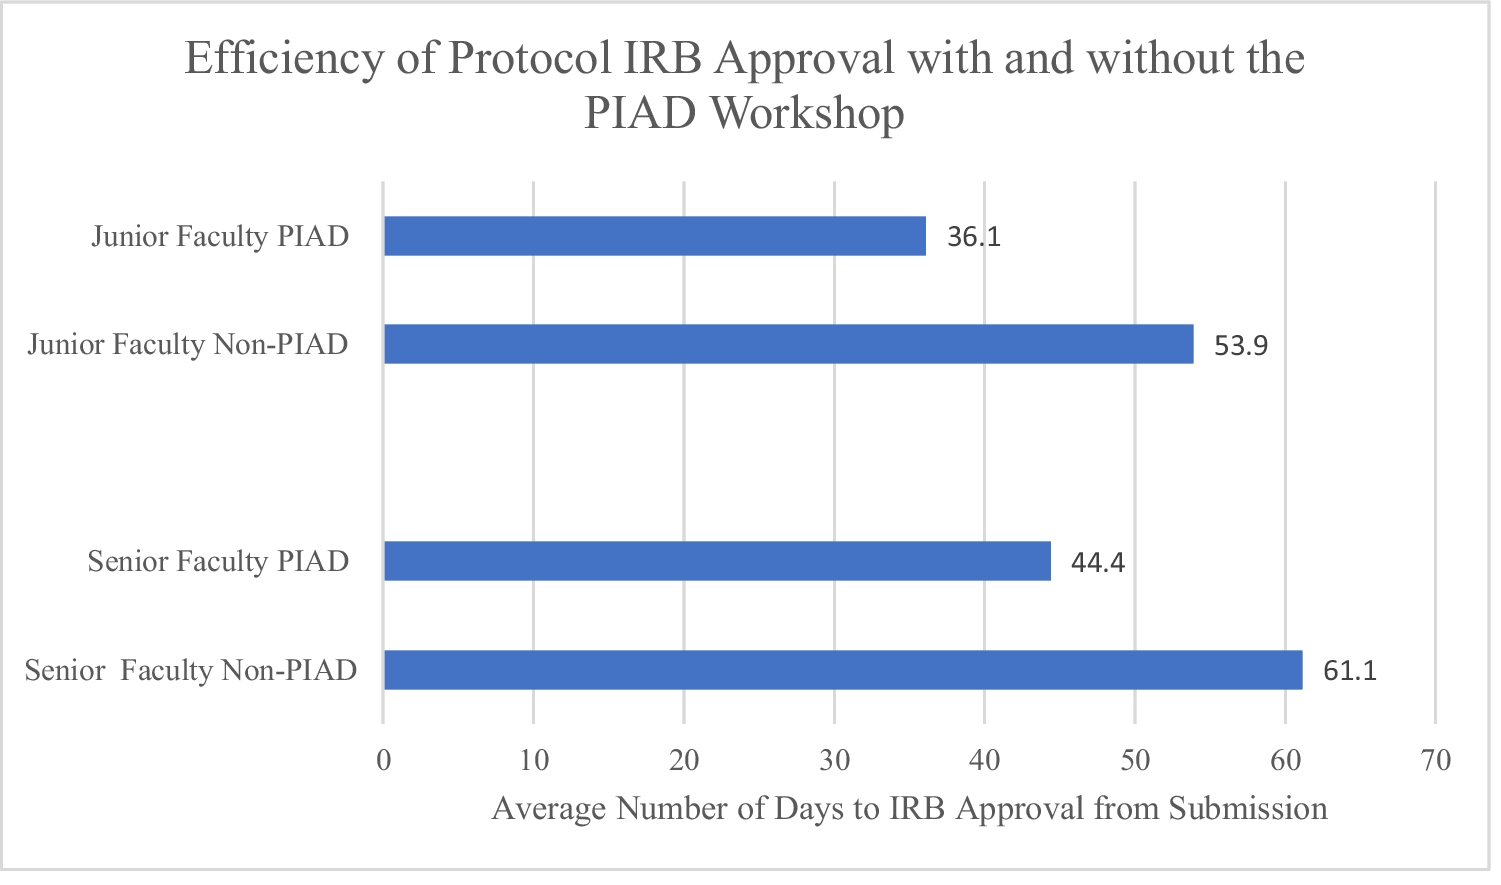 Protocol-in-a-Day Workshop: Expediting IRB Approval for Junior and Senior Faculty